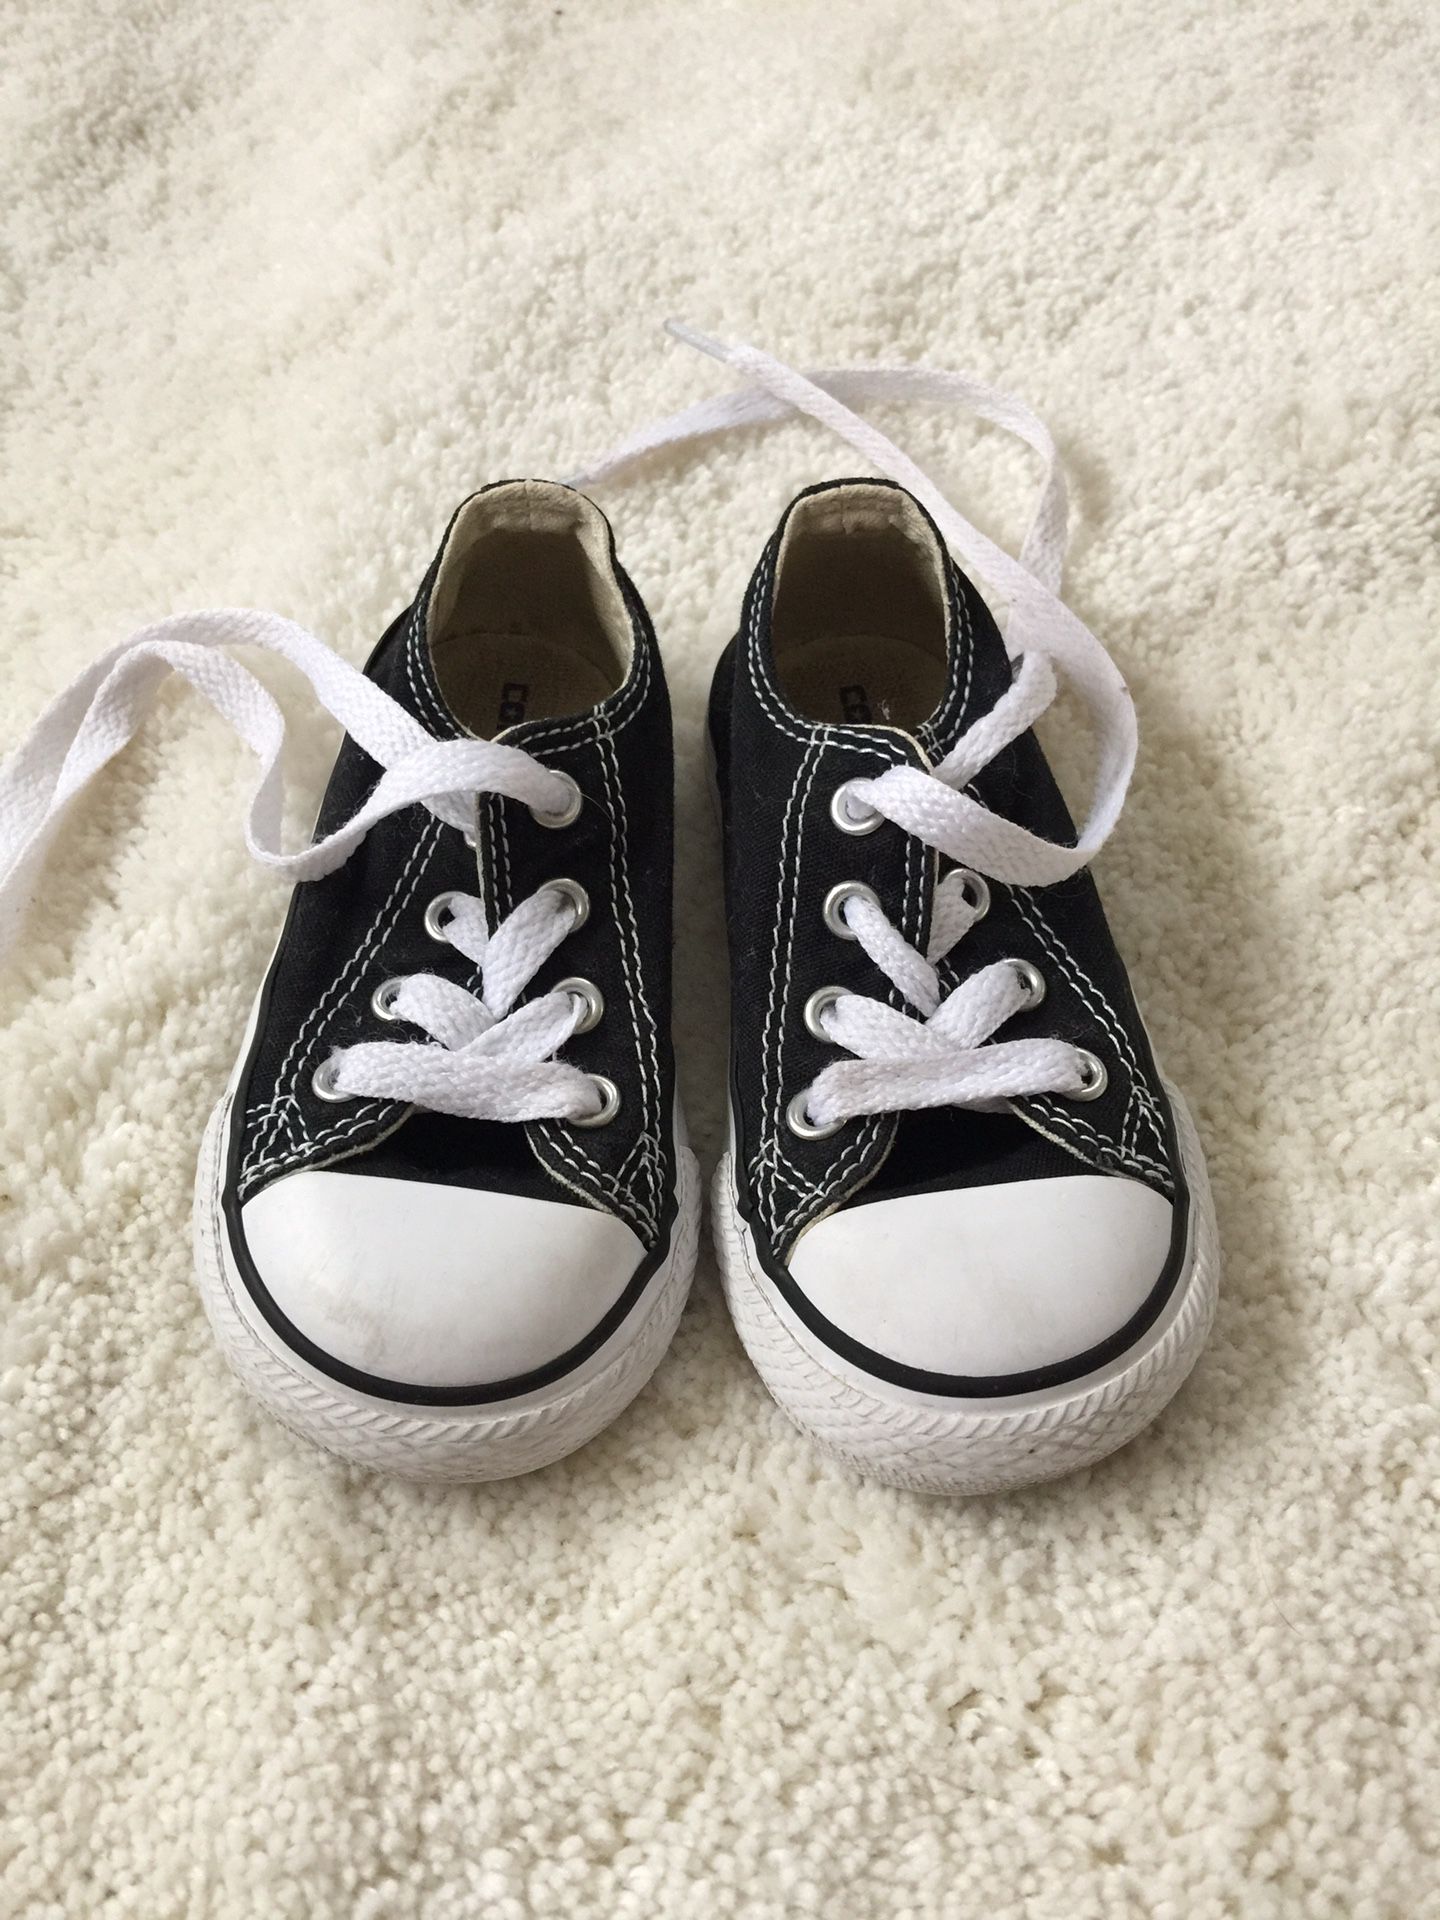 Toddler Kids Converse Shoes